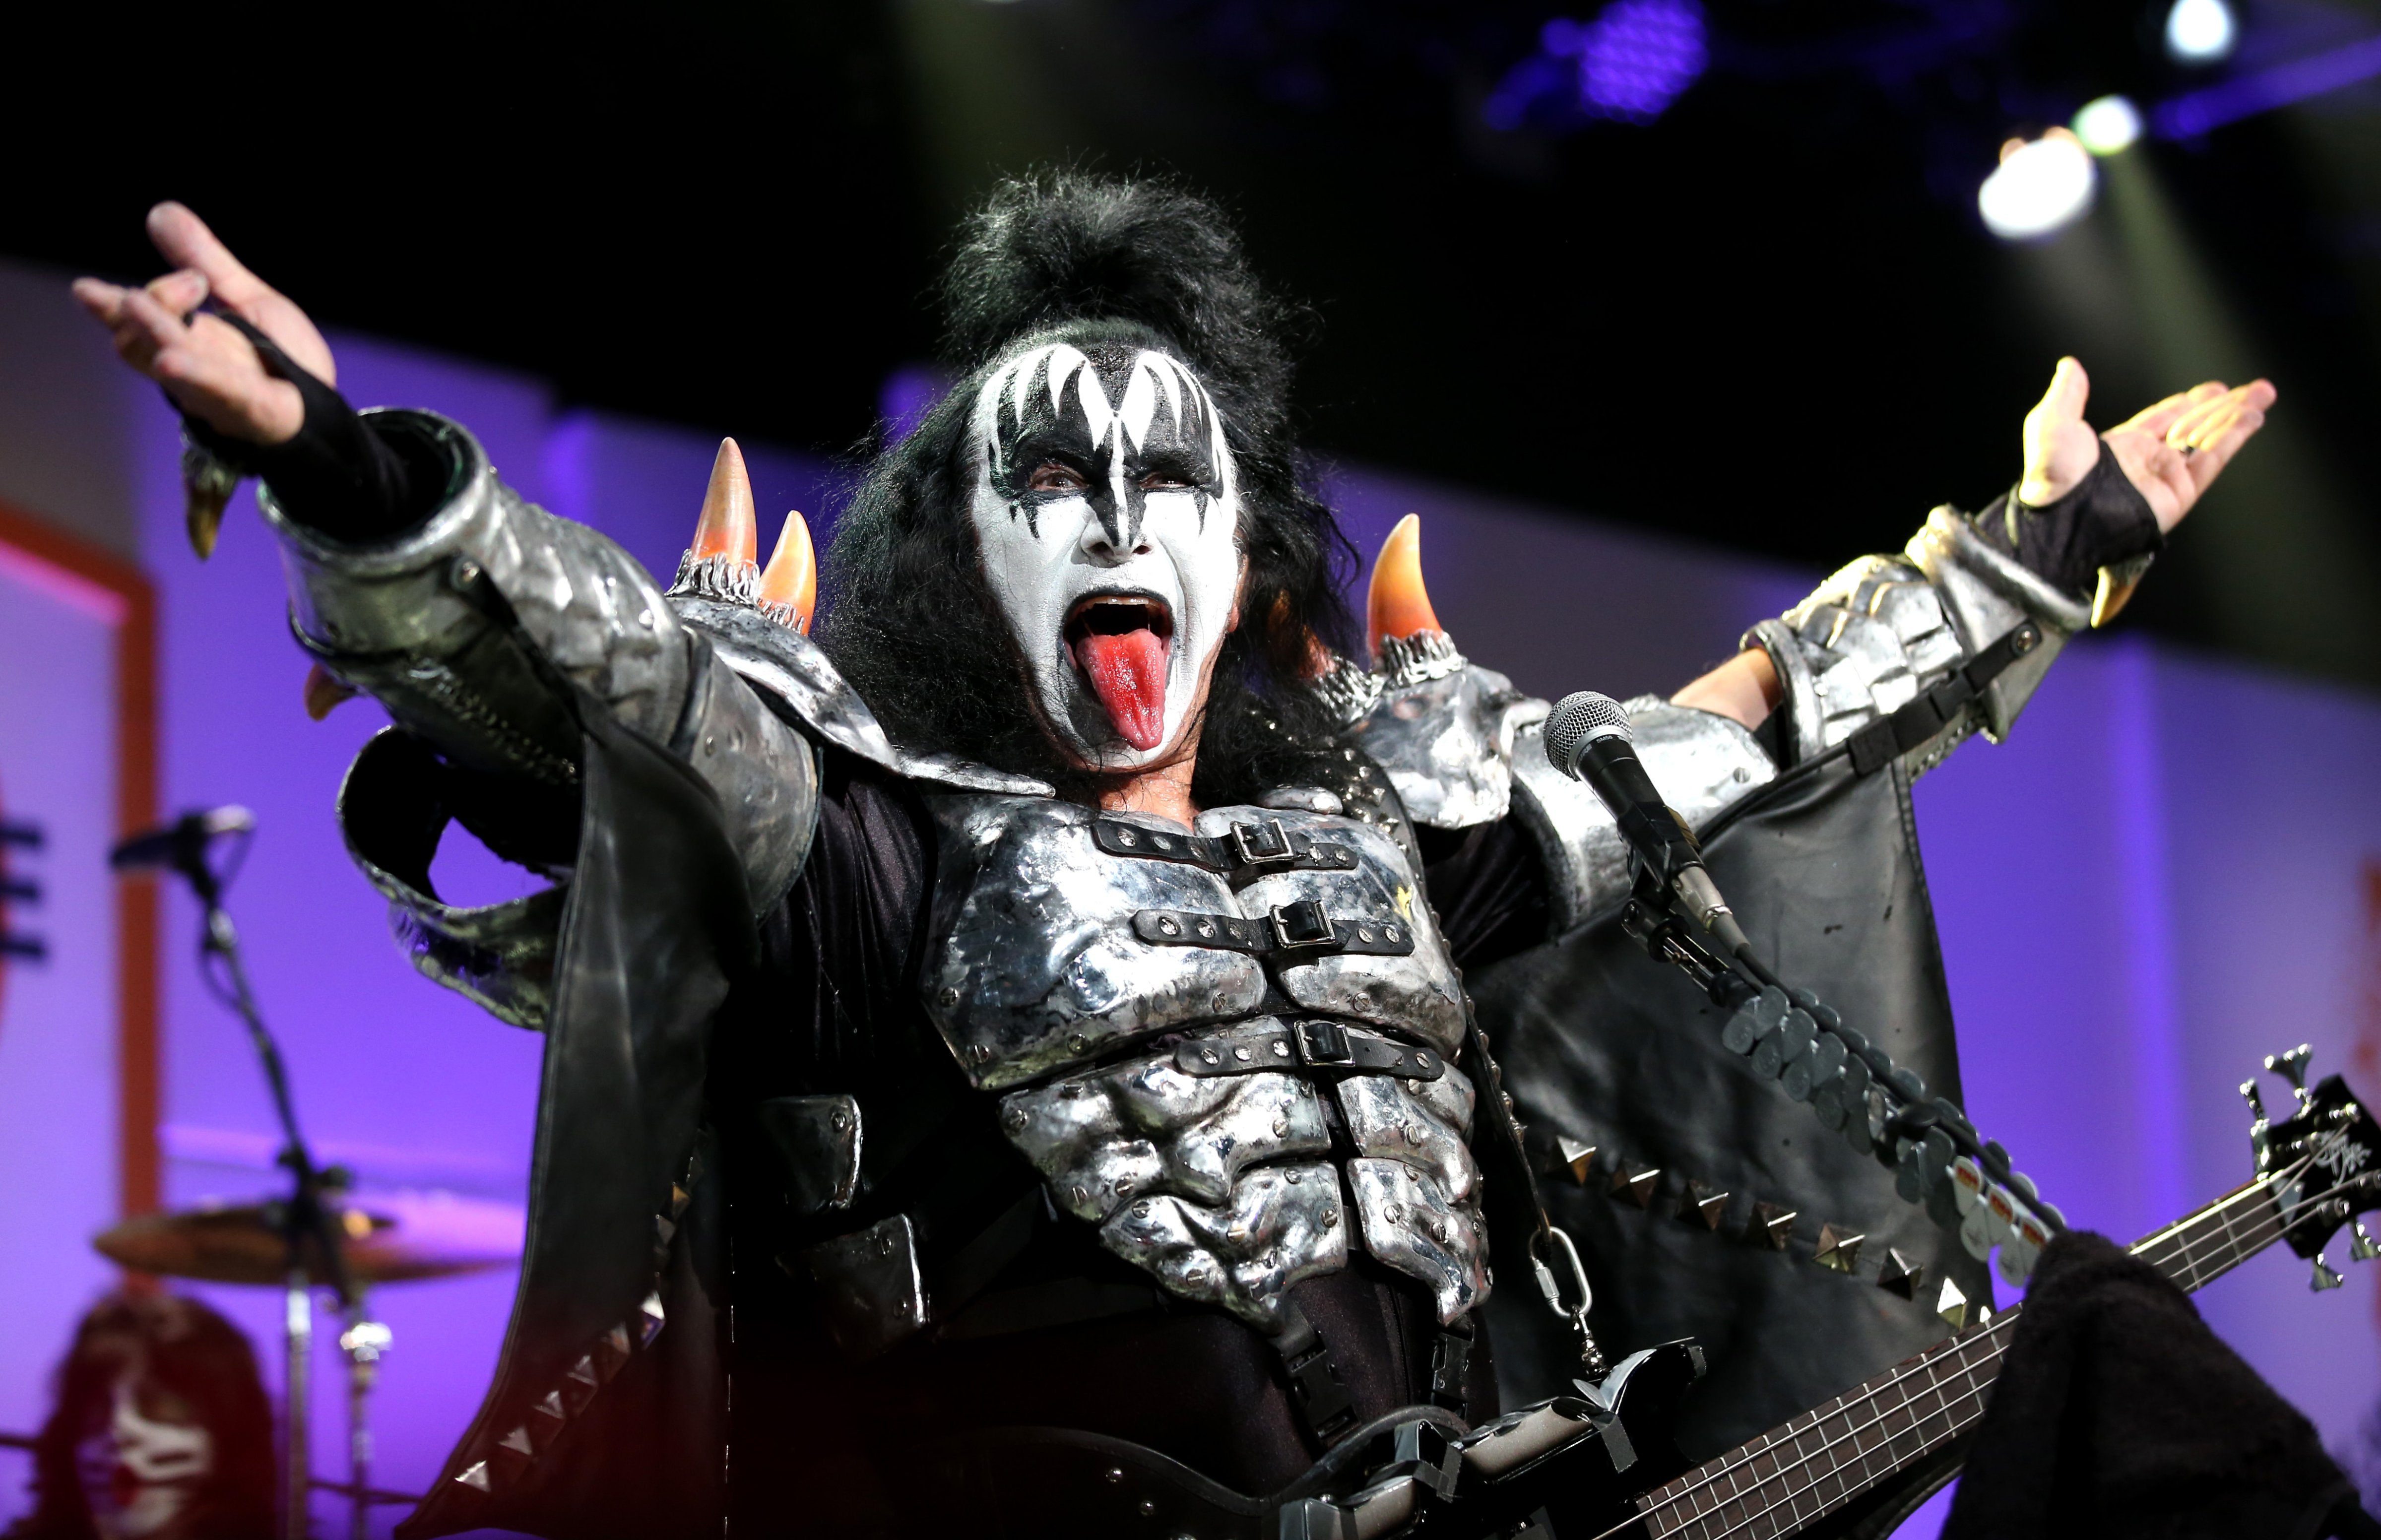 Musician Gene Simmons of KISS performs onstage during the 23rd Annual Race To Erase MS Gala at The Beverly Hilton Hotel on April 15, 2016 in Beverly Hills, California. (Joe Scarnici&mdash;Getty Images)